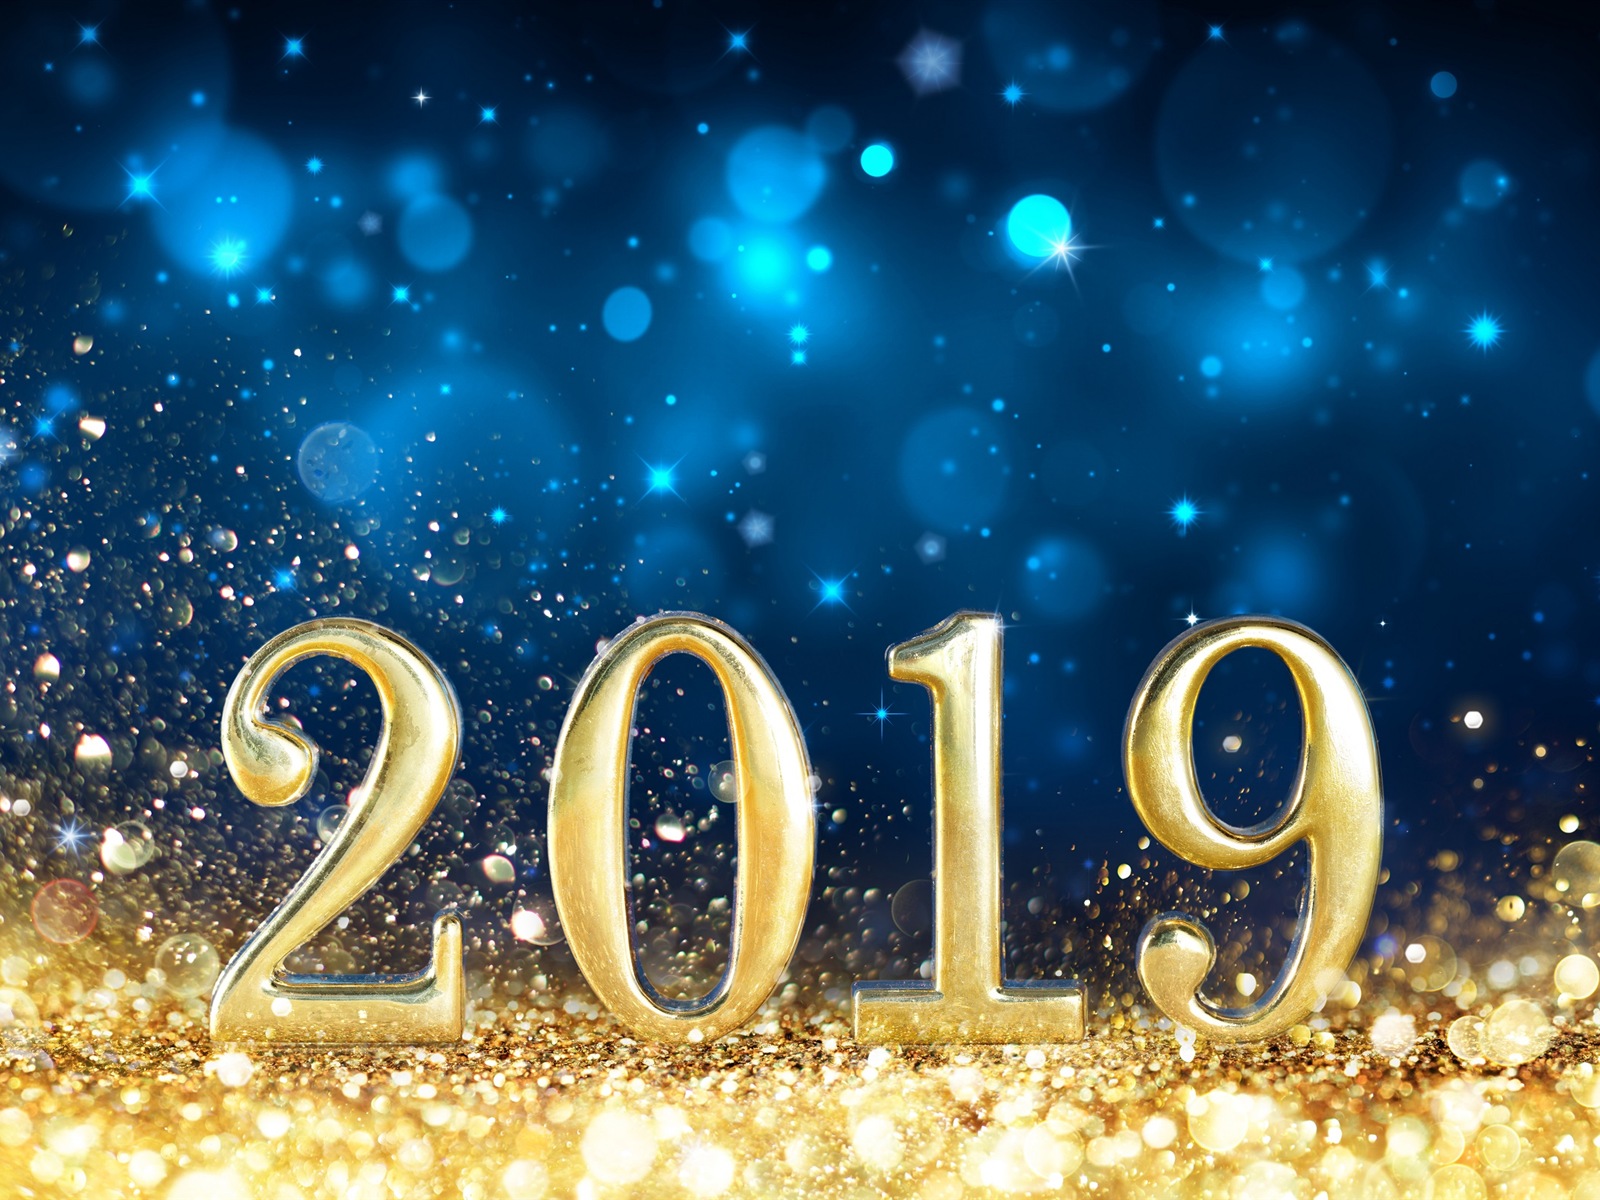 Happy New Year 2019 HD wallpapers #5 - 1600x1200